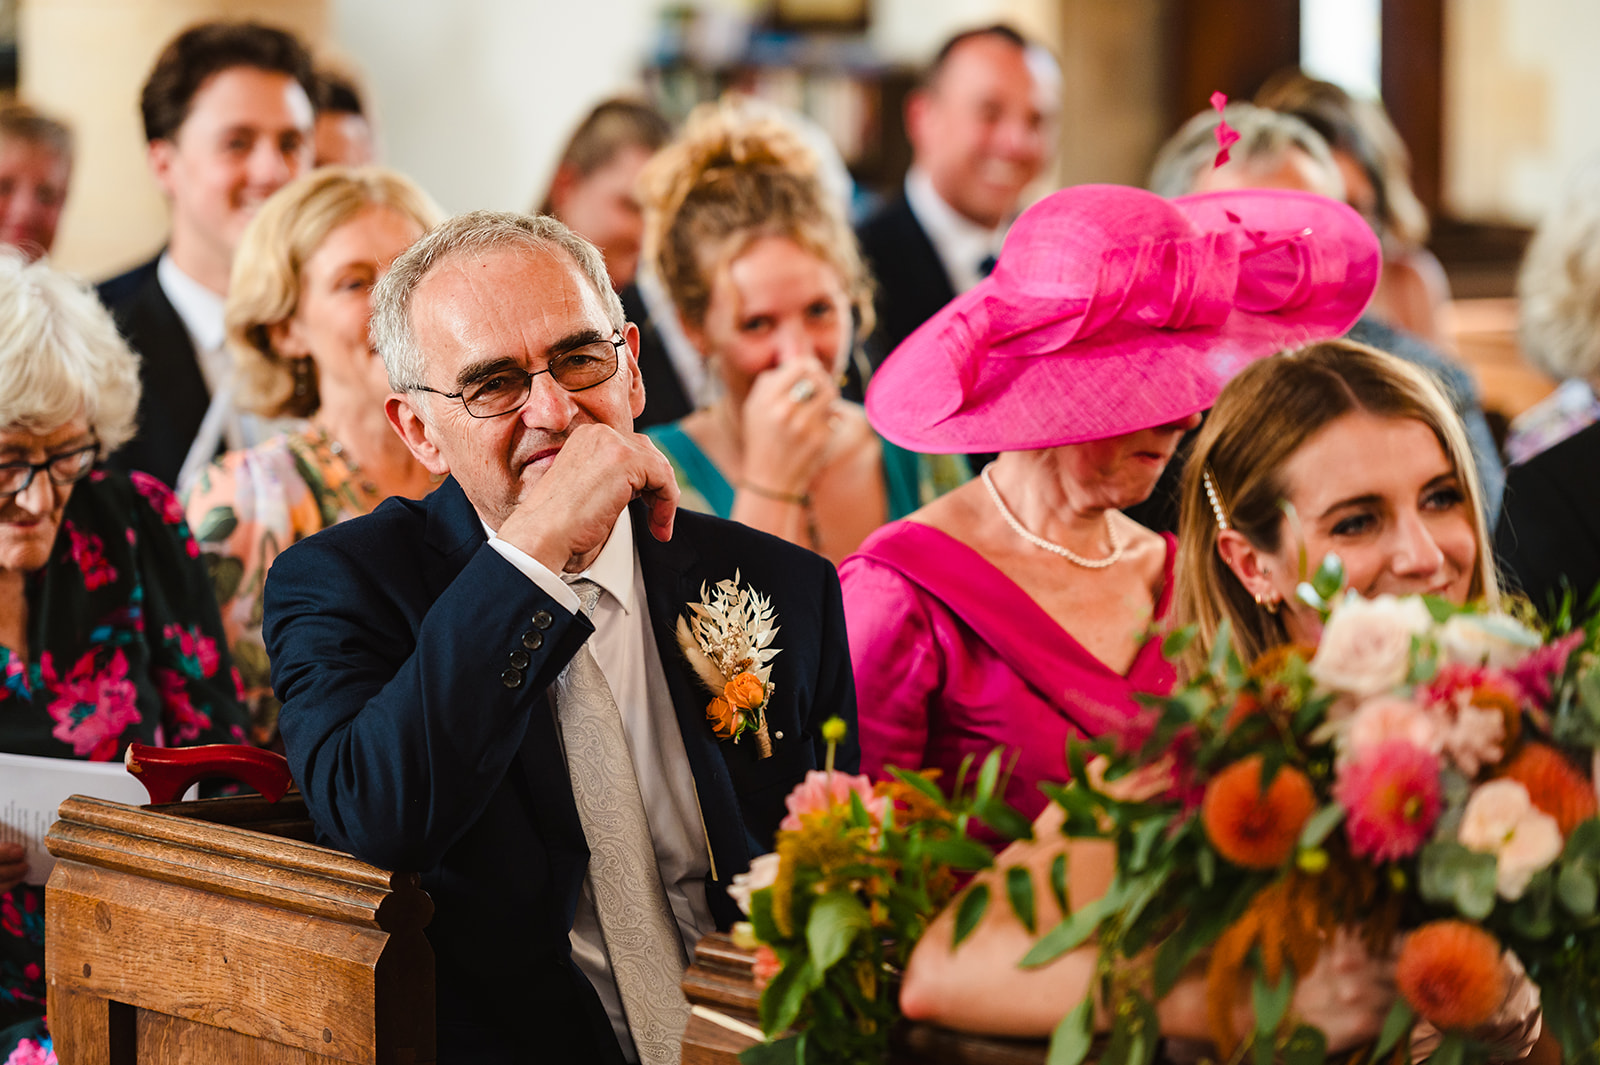 proud father during wedding ceremony in exton rutland